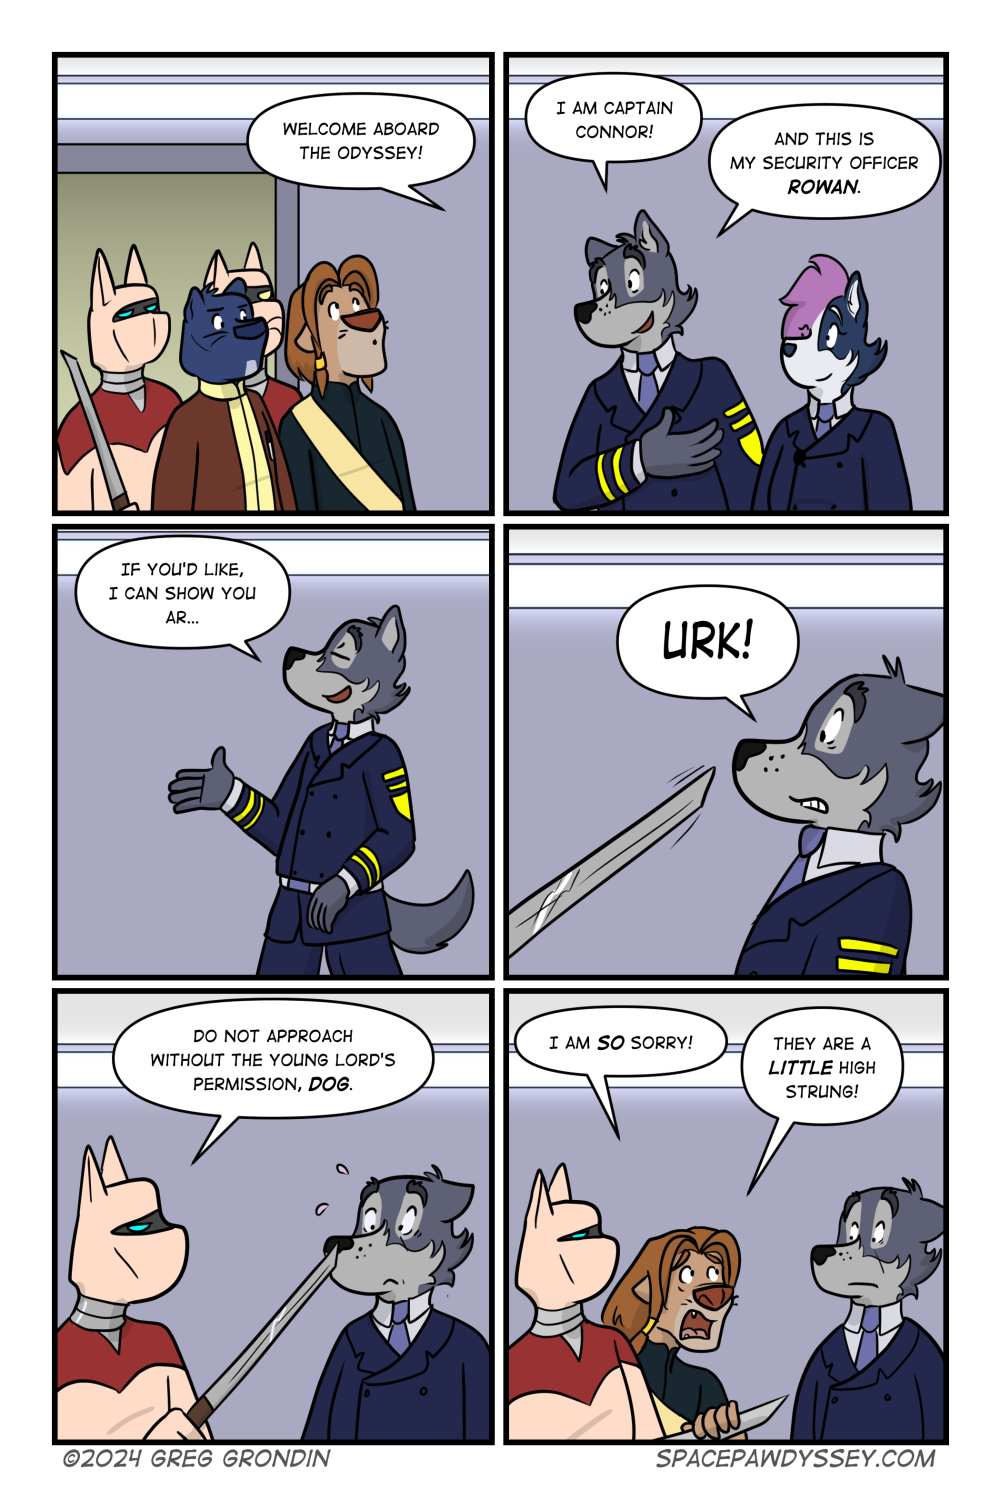 Space Pawdyssey #670